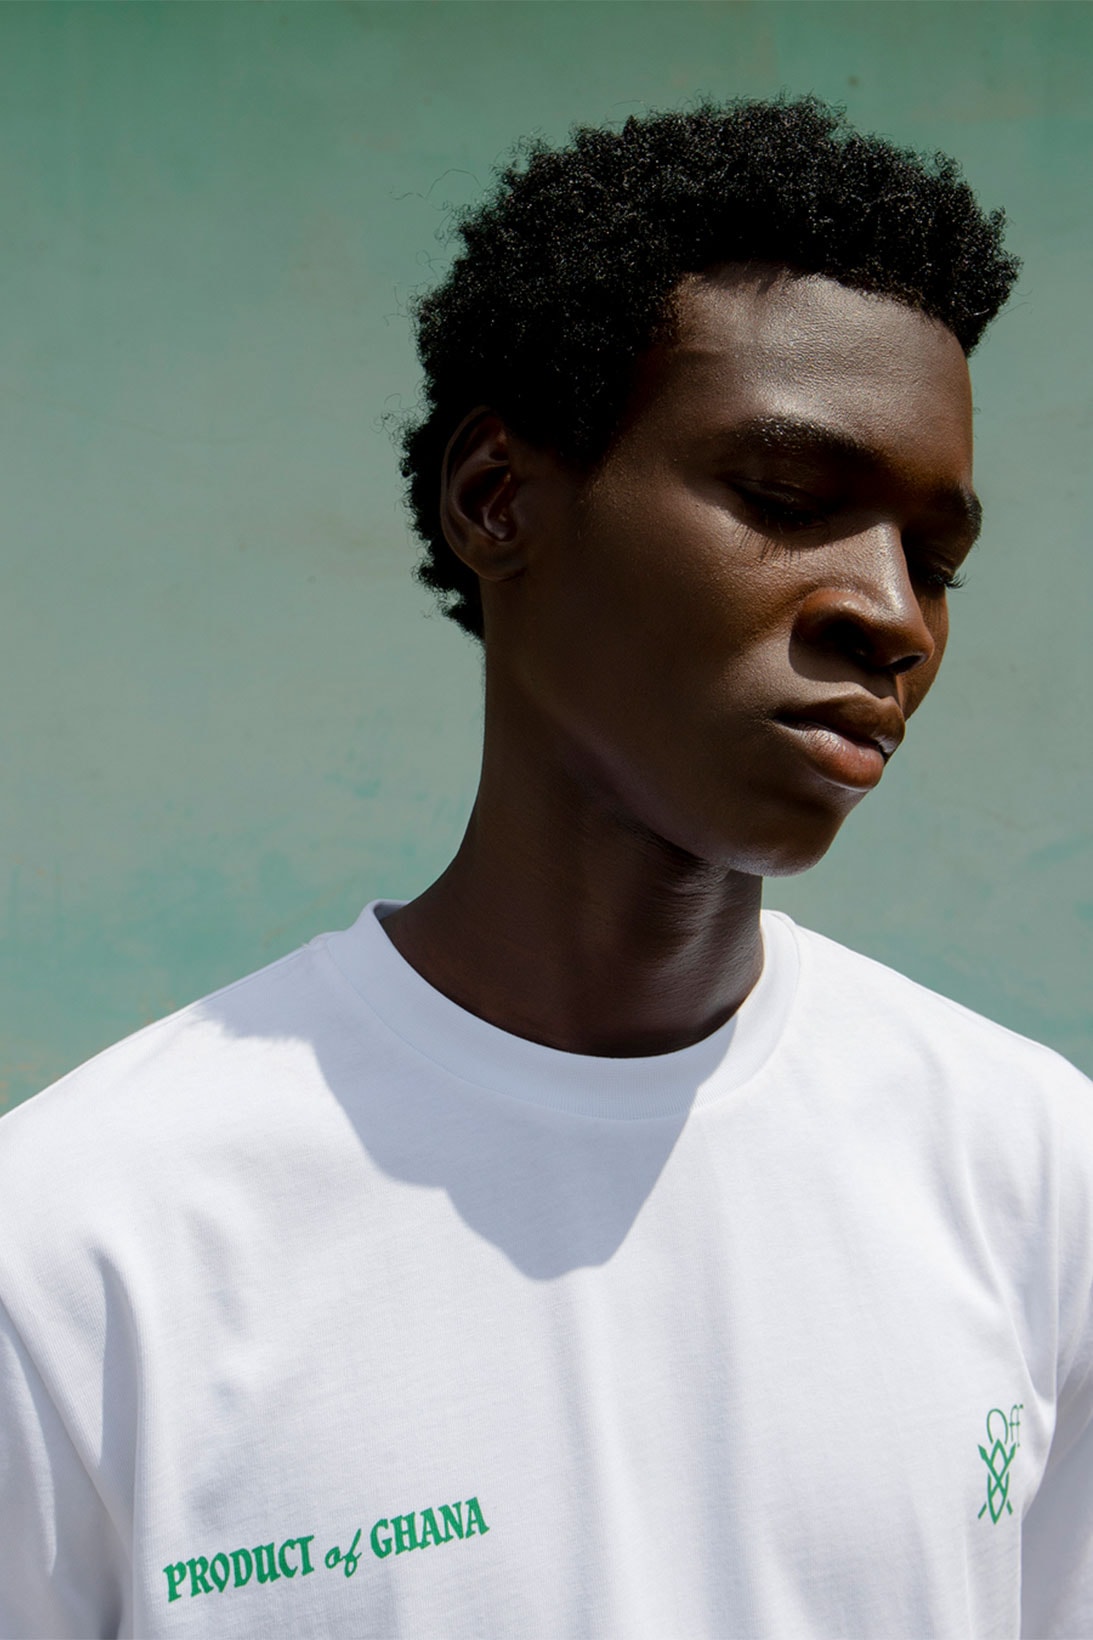 Off-White™, Surf Ghana x Daily Paper Skate Park Collab